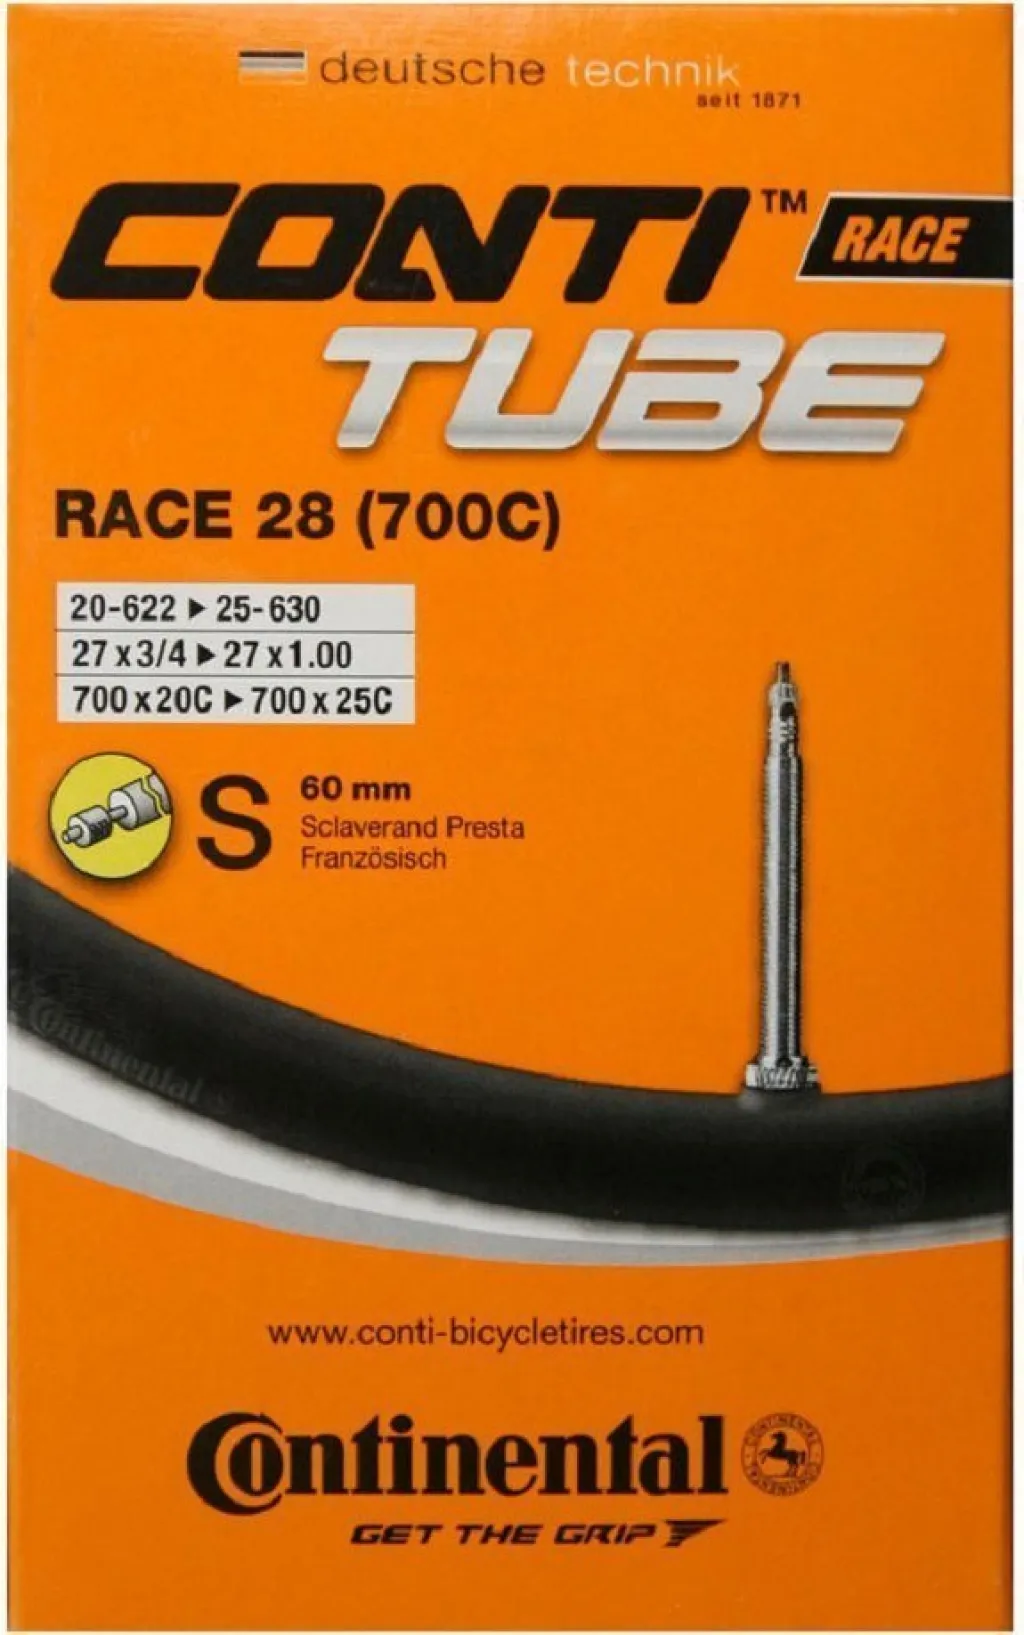 Камера 28" Continental Race Tube S60 (20-622->25-630) (105g)